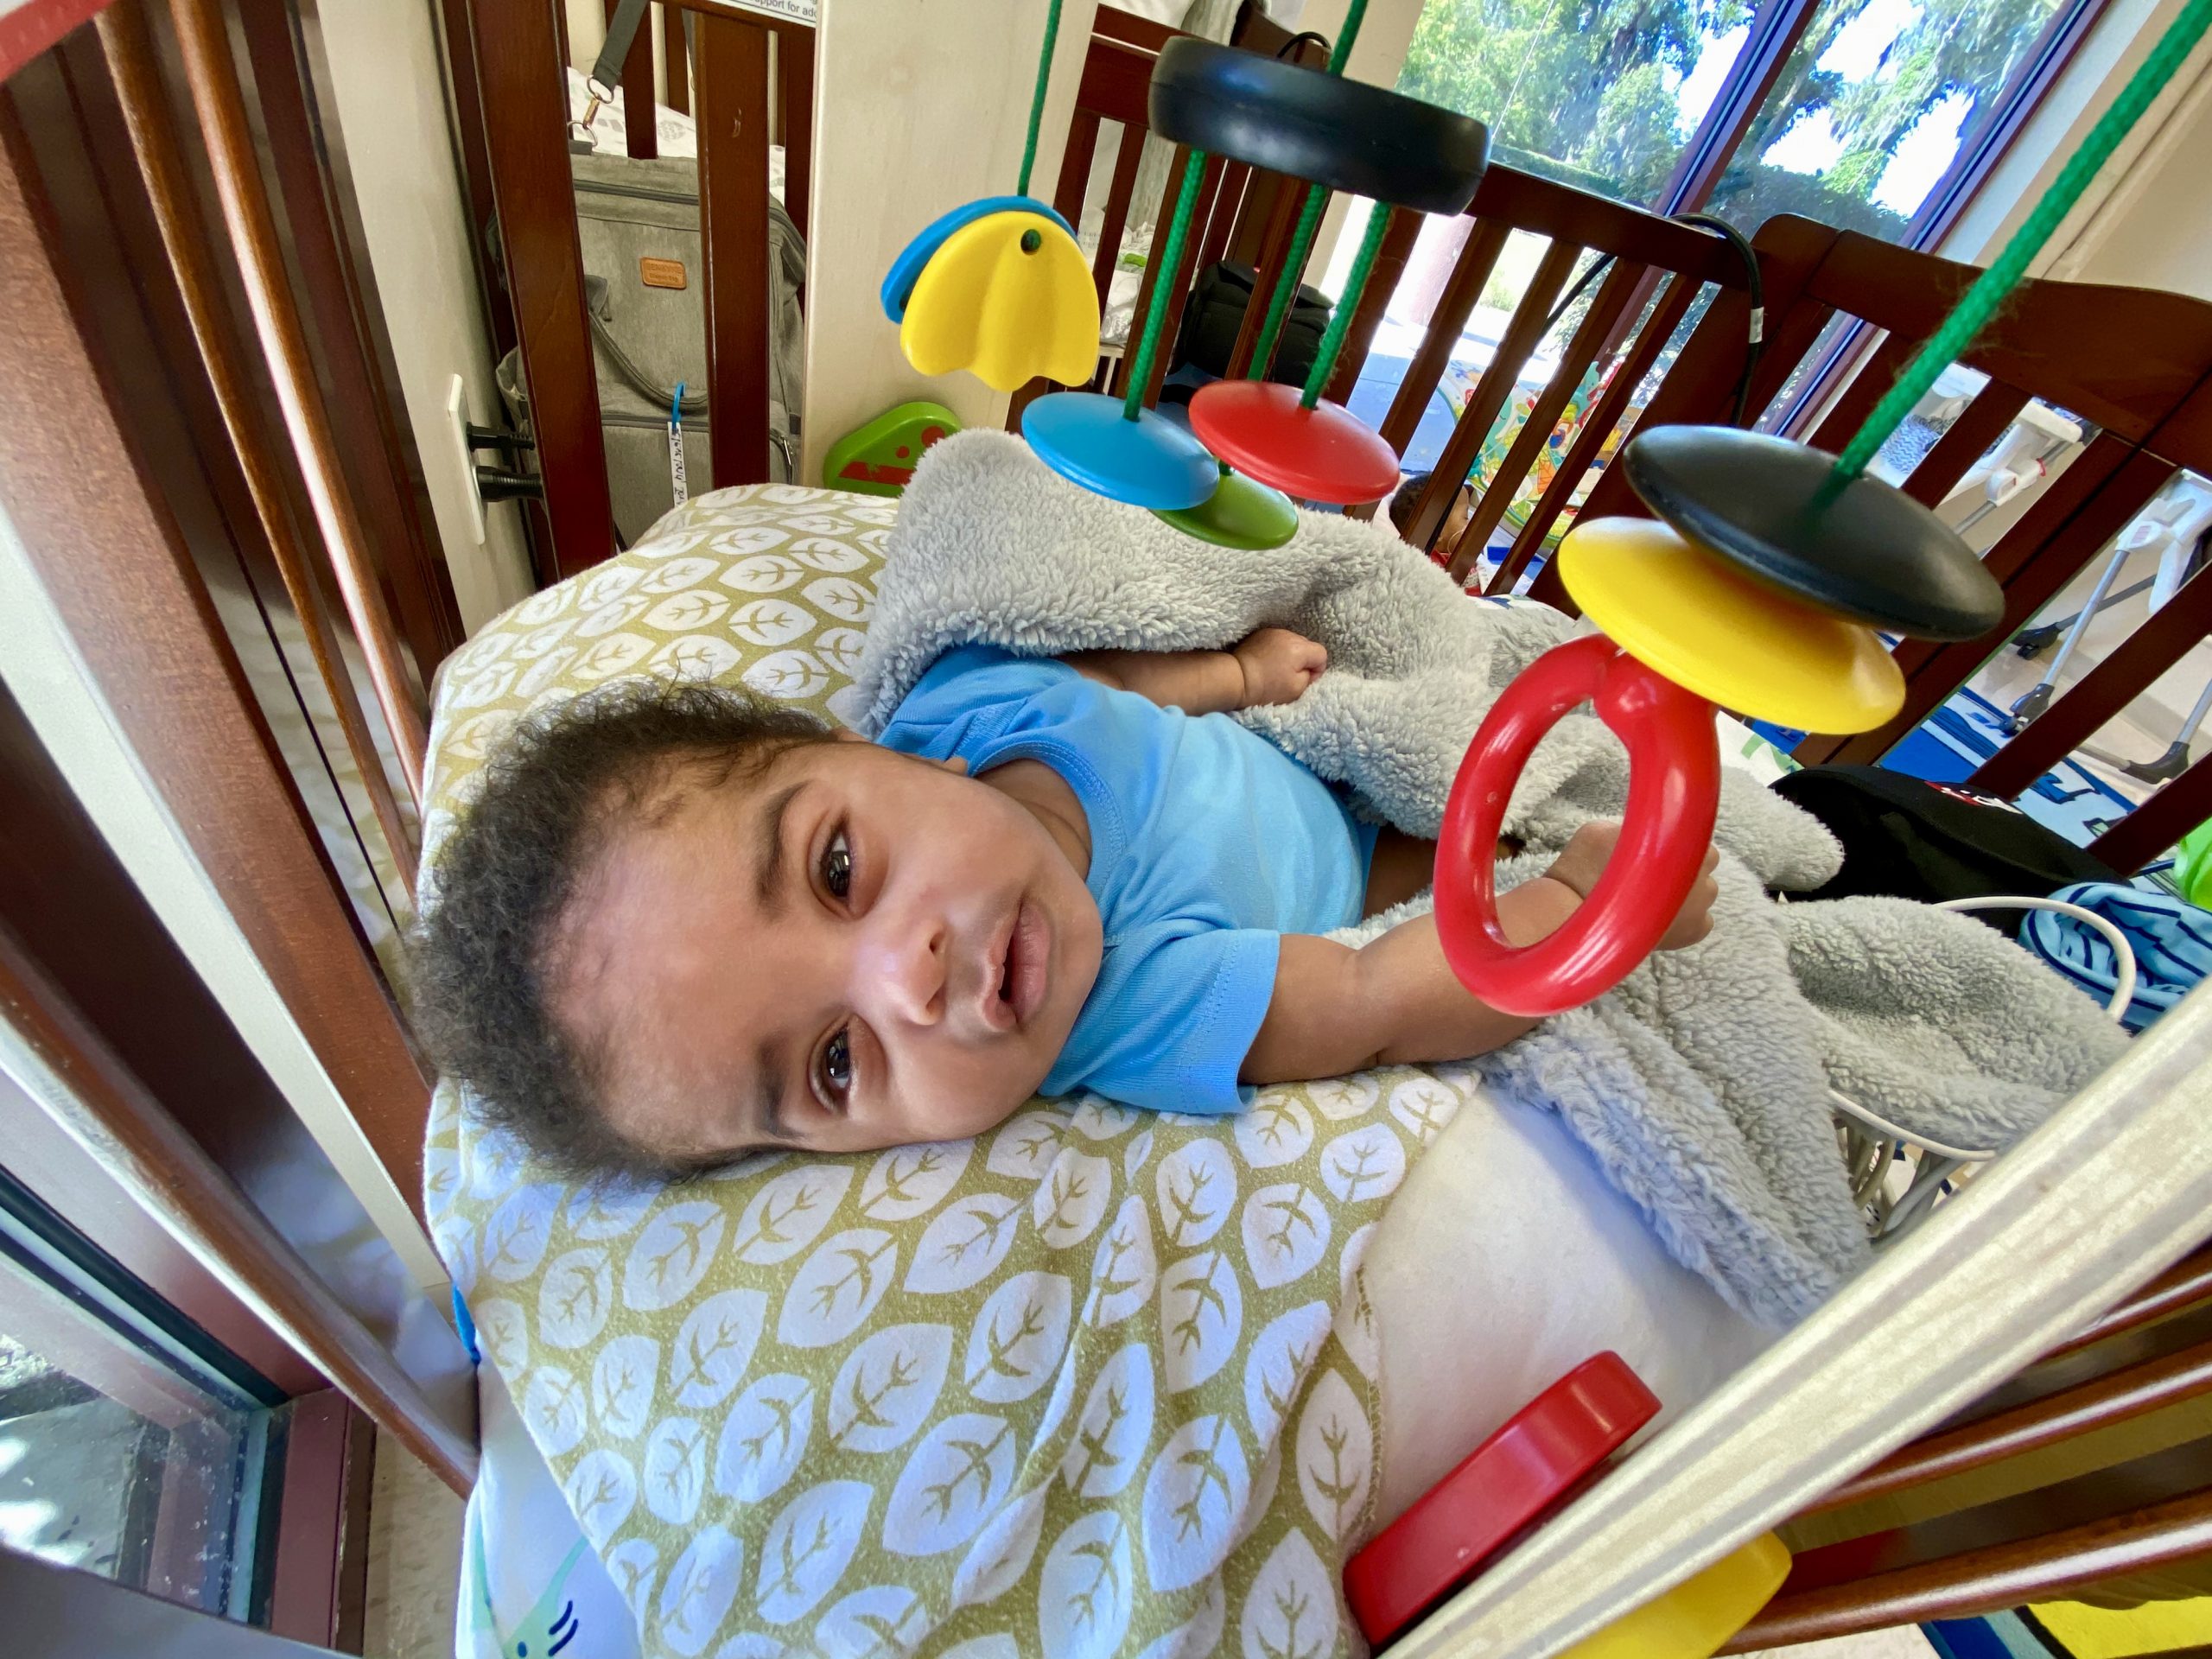 Infant in transitional care at a medical group home